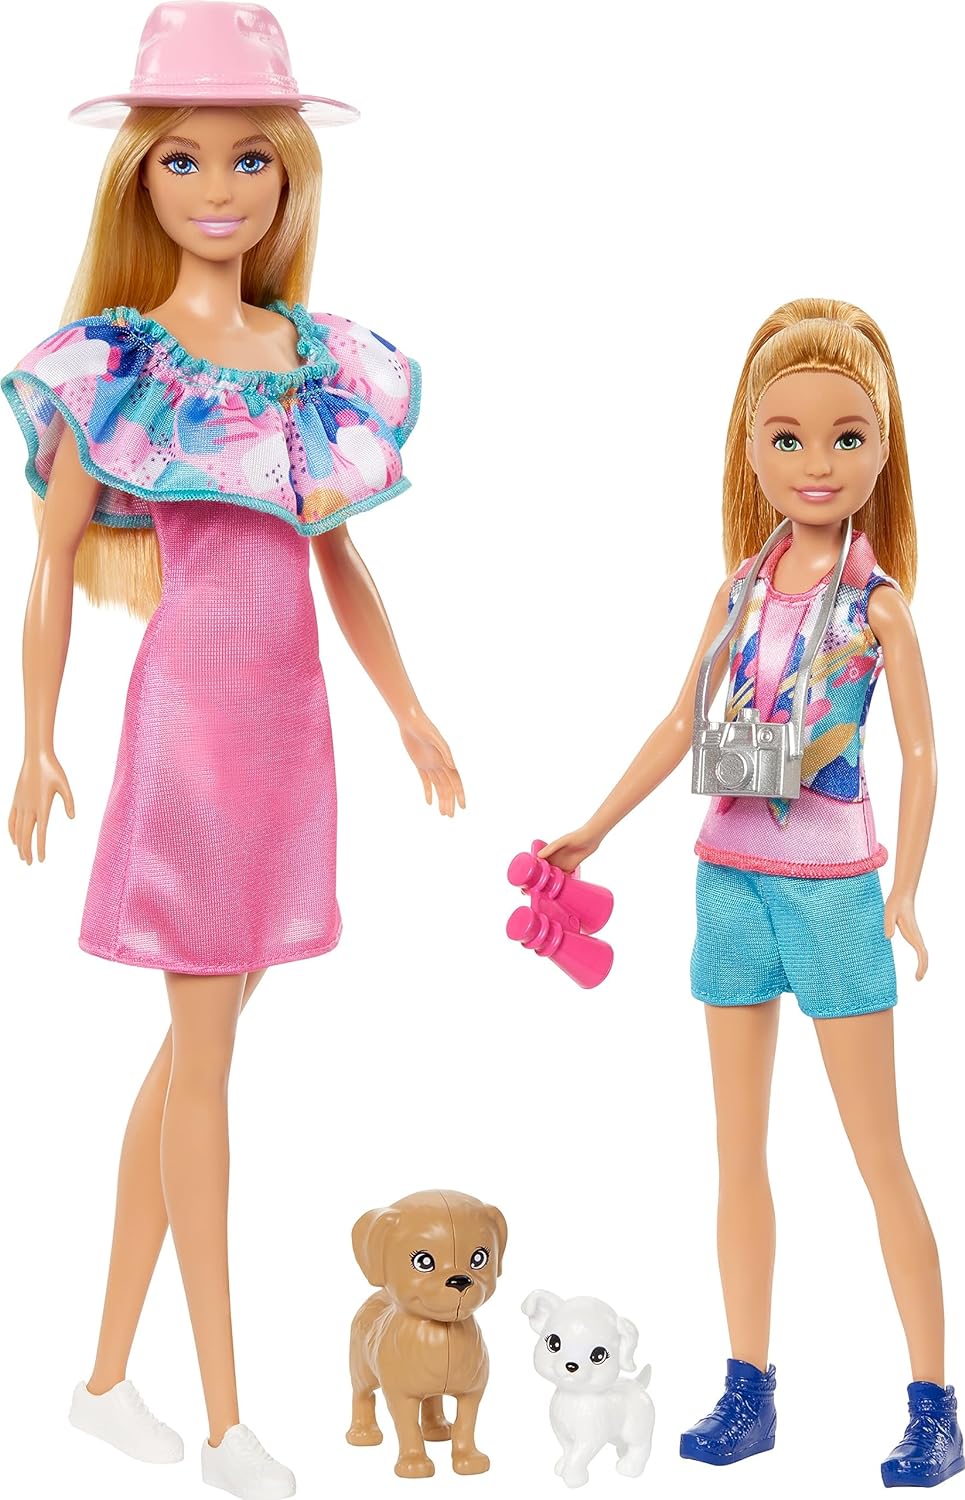 Barbie & Stacie to the Rescue Playset